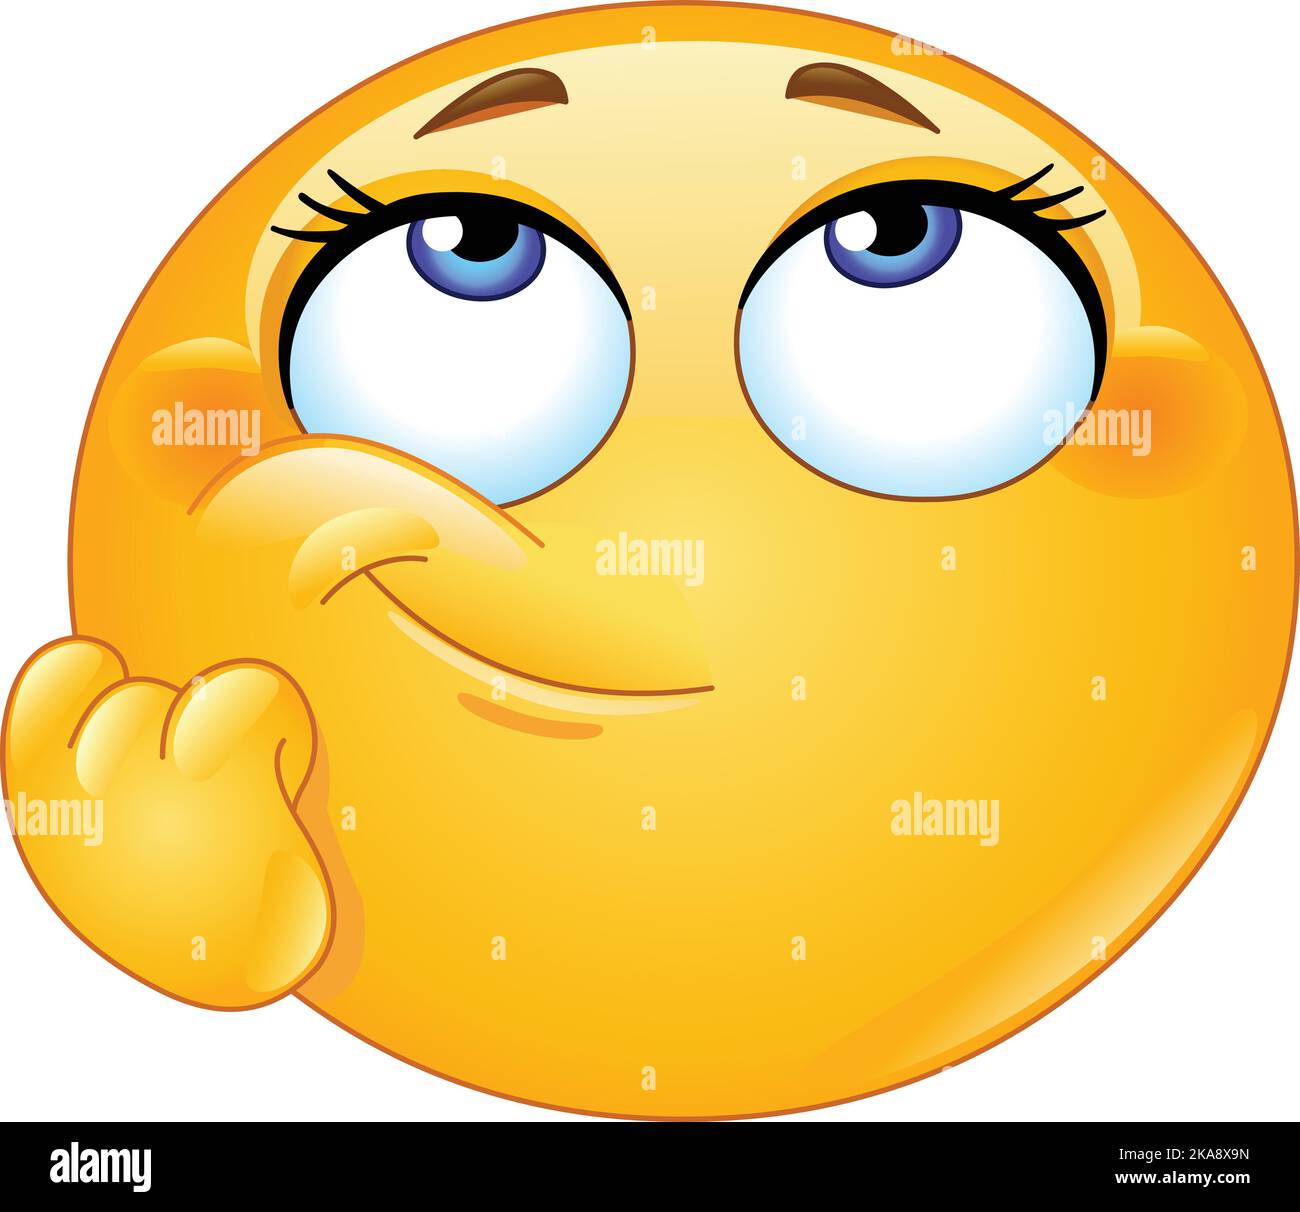 Female emoji emoticon making a ponder, think or a day dreaming gesture with her hand on cheek Stock Vector